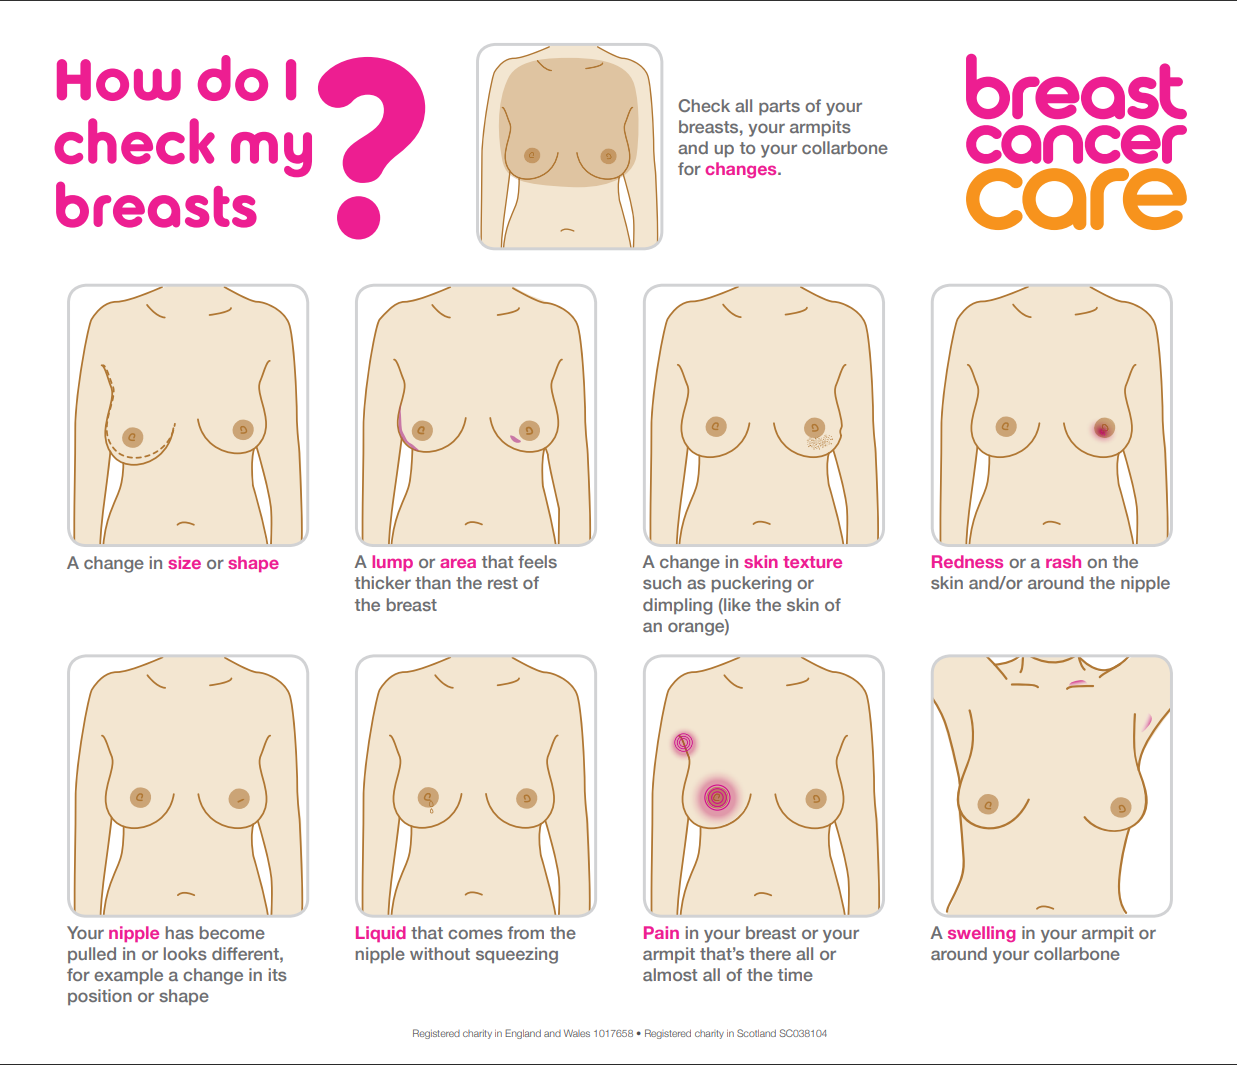 How to Determine Your Breast Shape